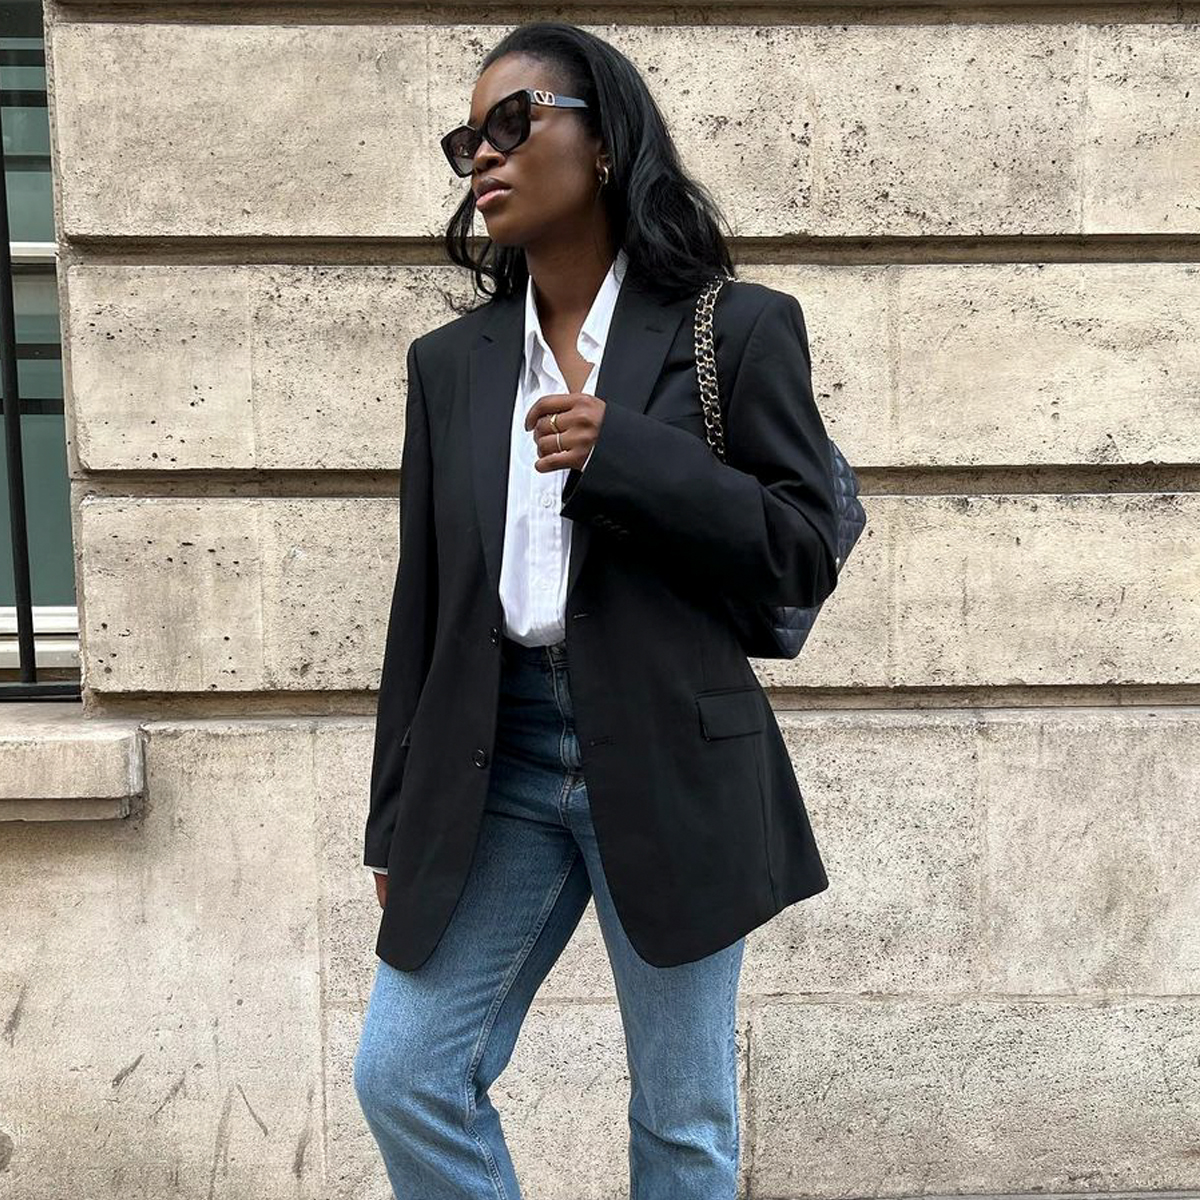 Rock Your Style with These Chic Oversized Black Jacket Outfit Ideas ...